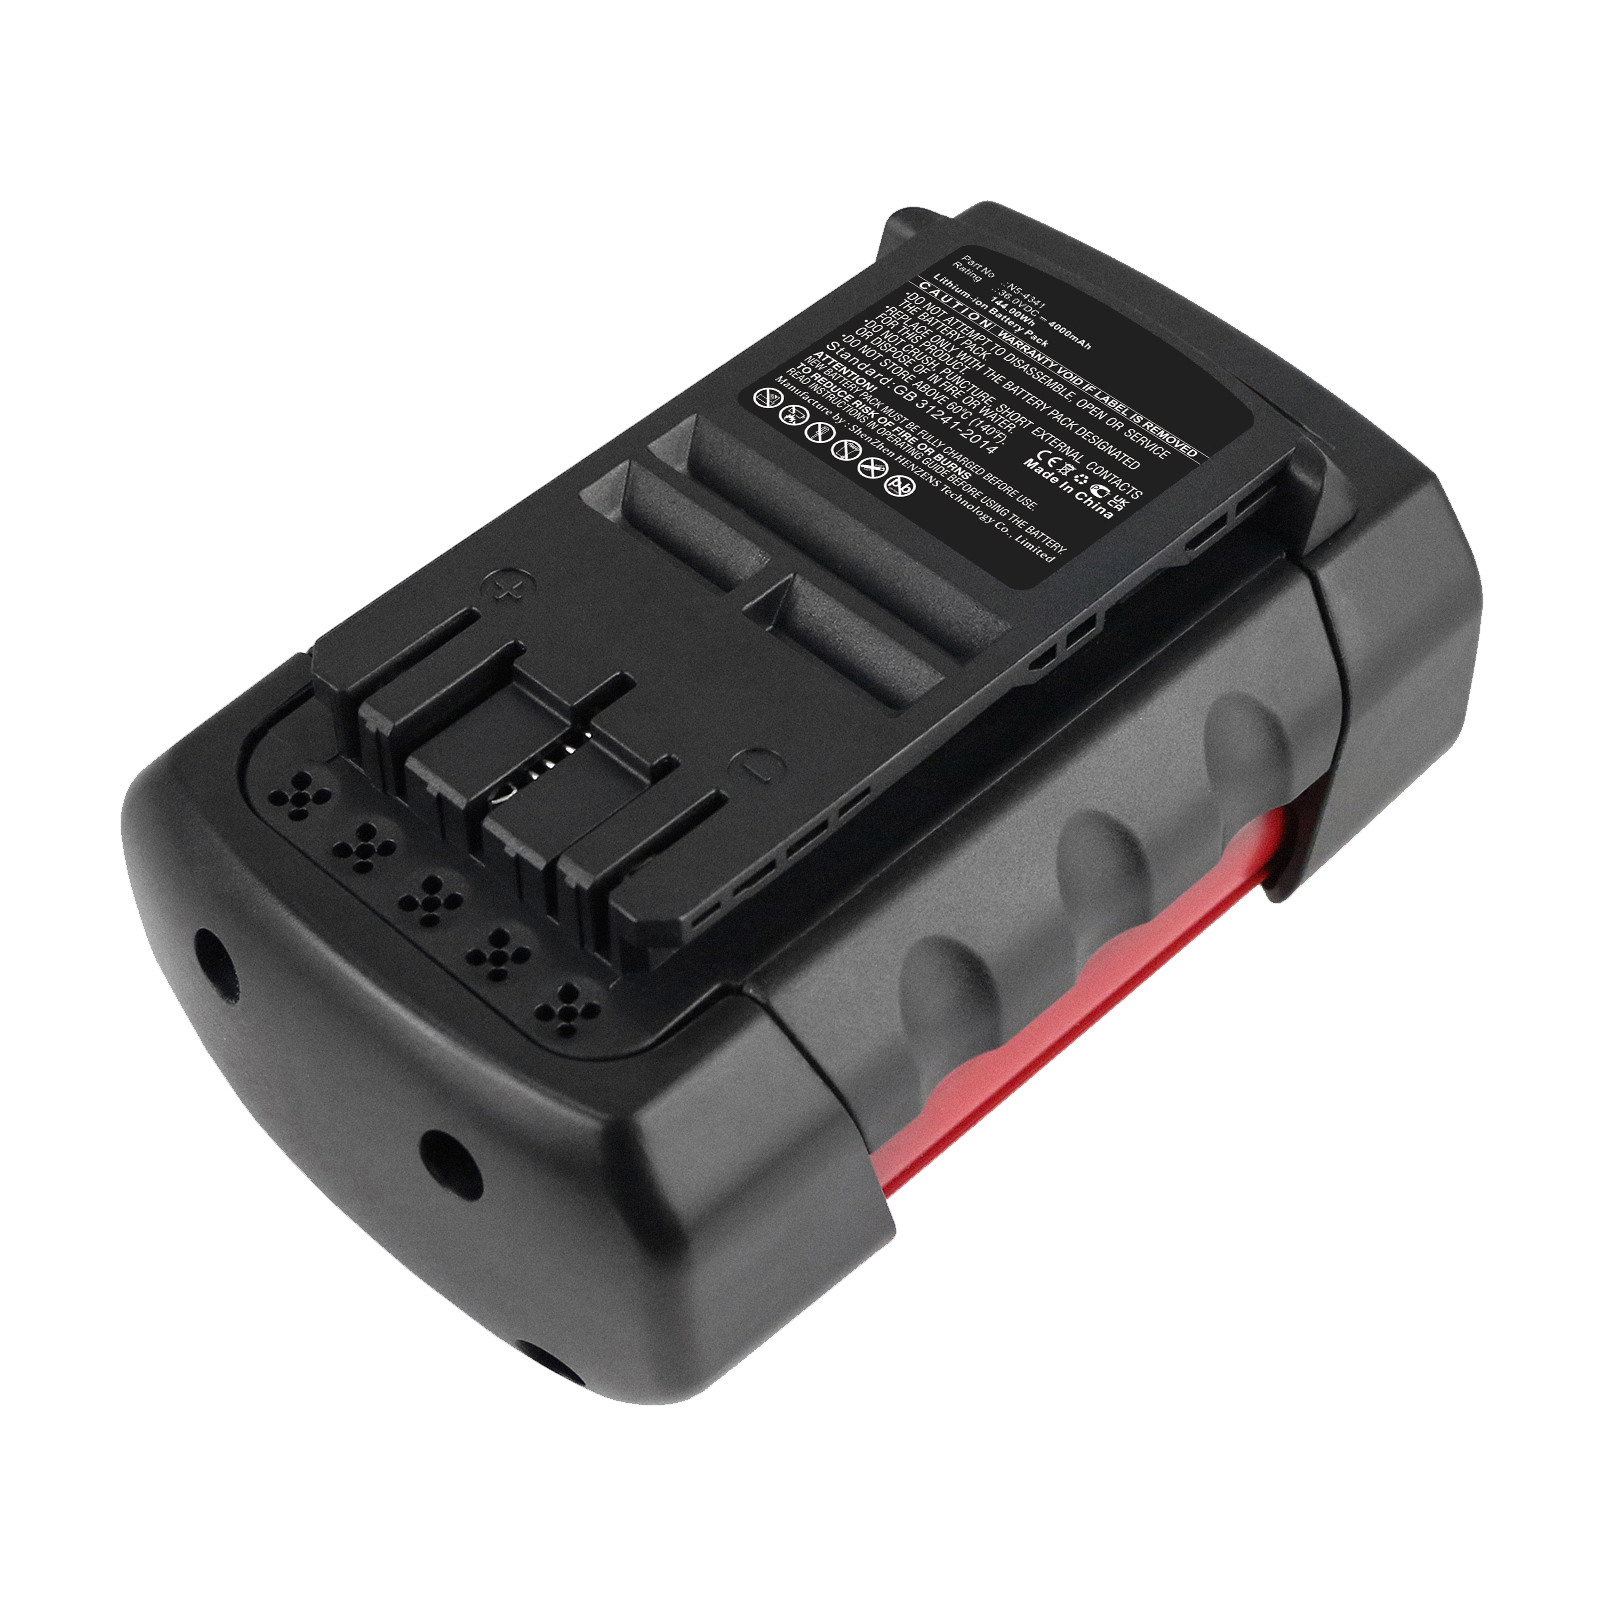 Synergy Digital Strapping Tools Battery, Compatible with ORGAPACK OR-T650 Strapping Tools Battery (Li-ion, 36V, 4000mAh)